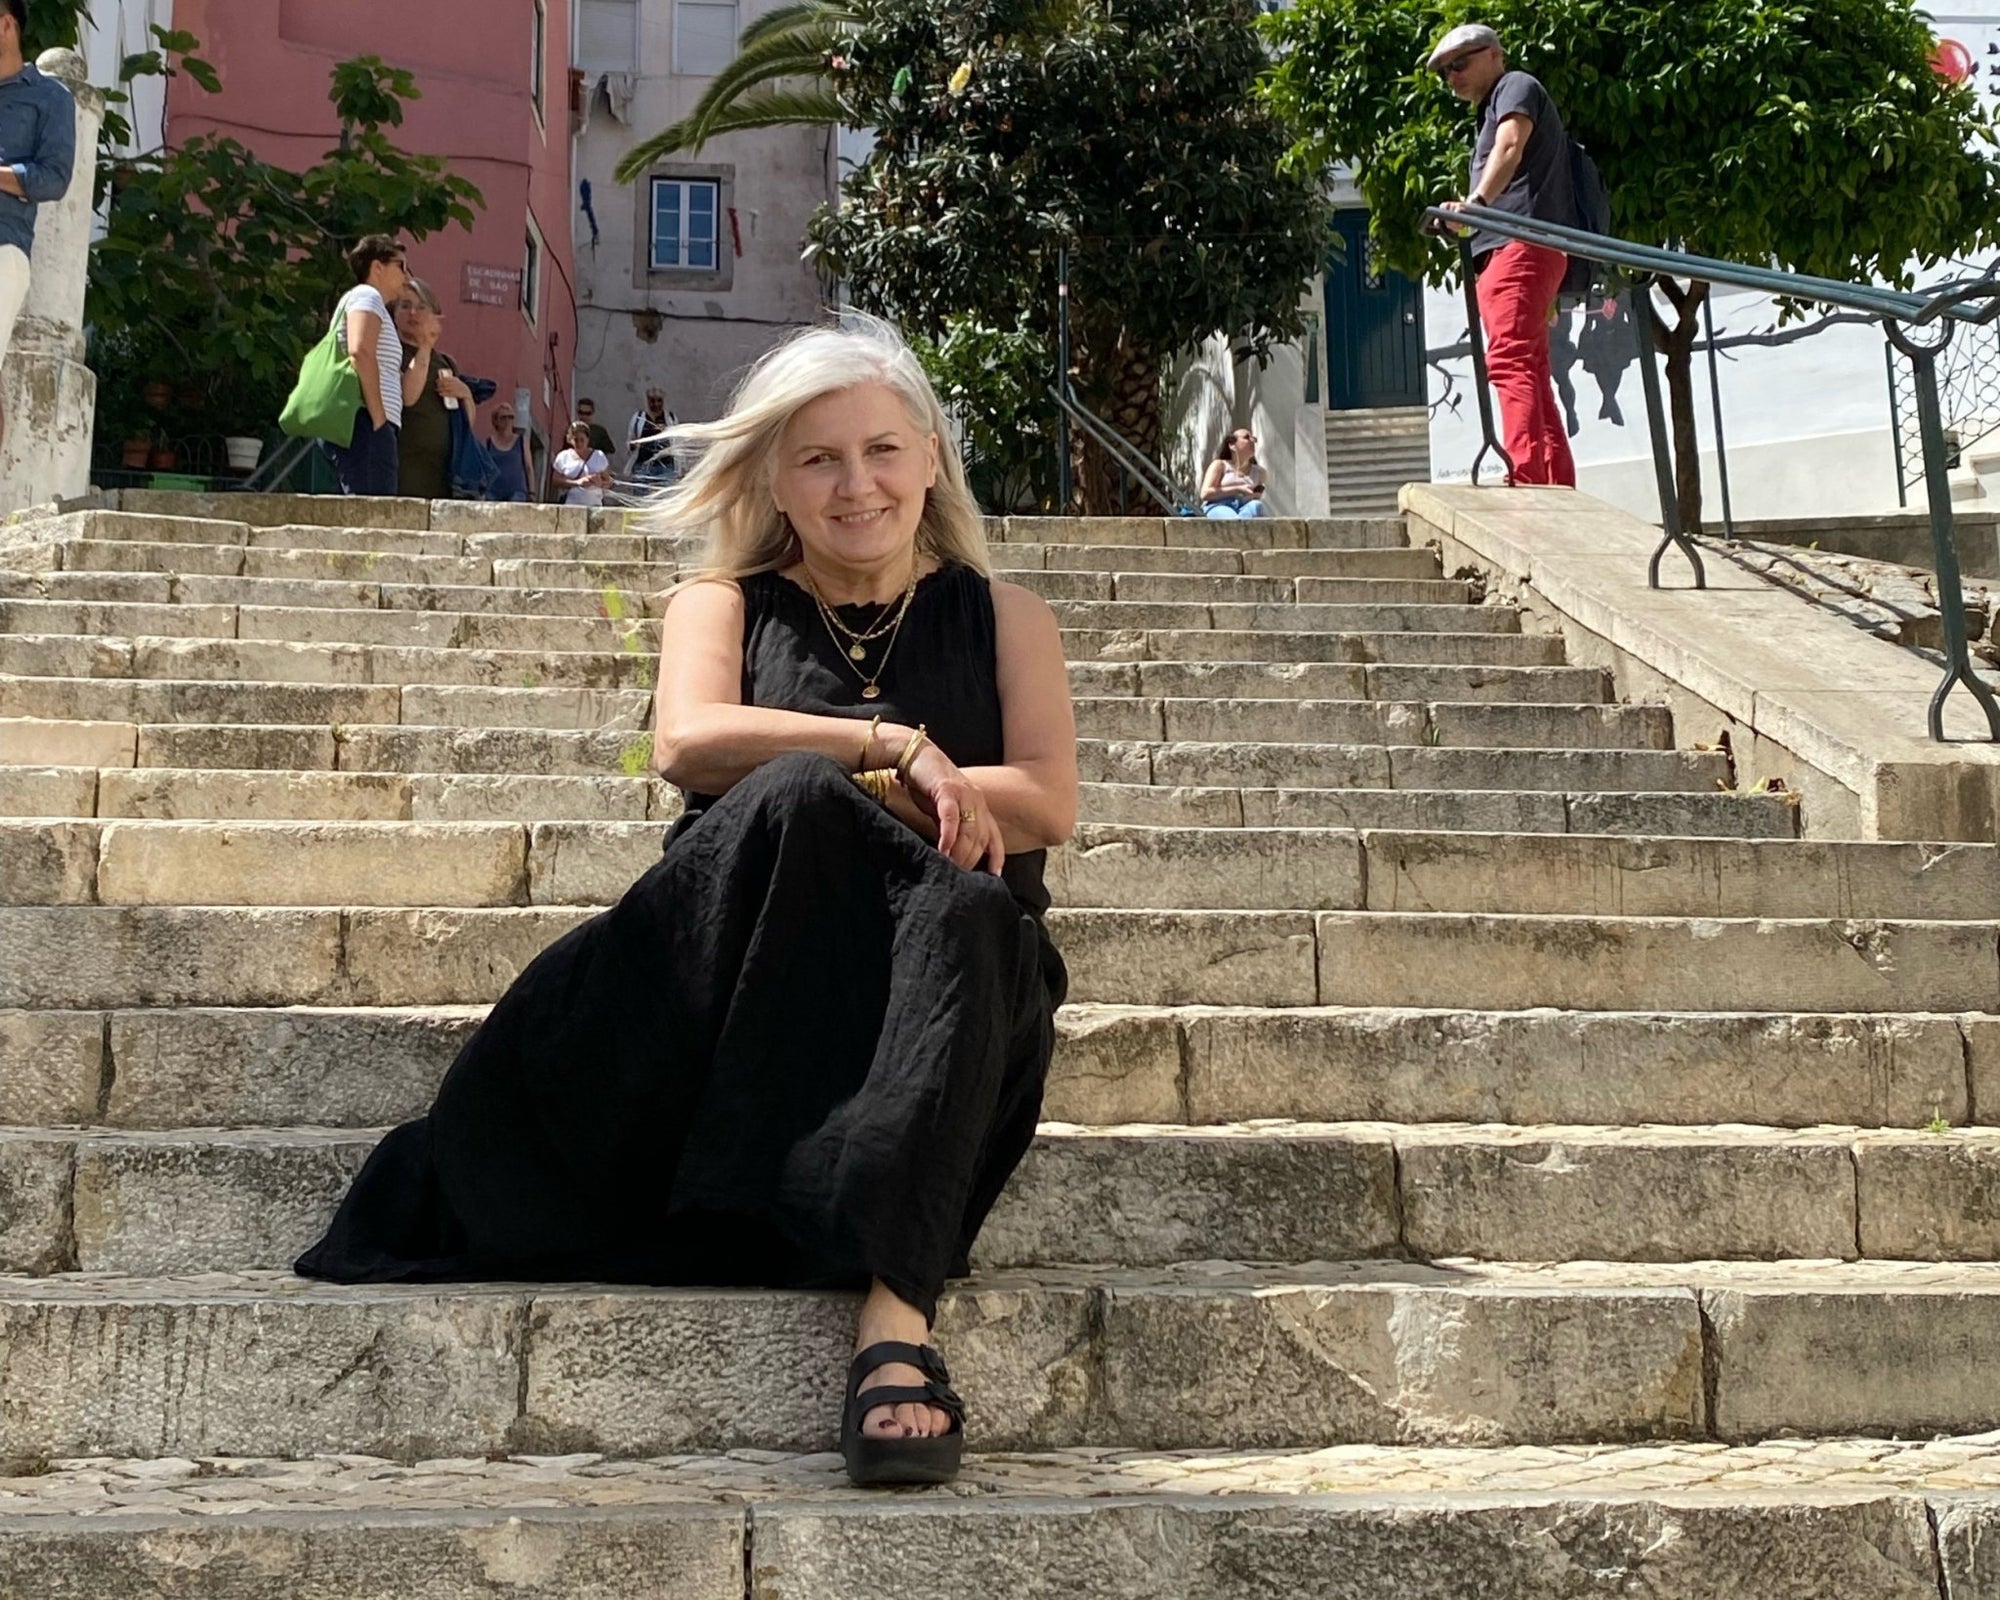 My Revelation on Aging While in Portugal - ORESTA clean beauty simplified